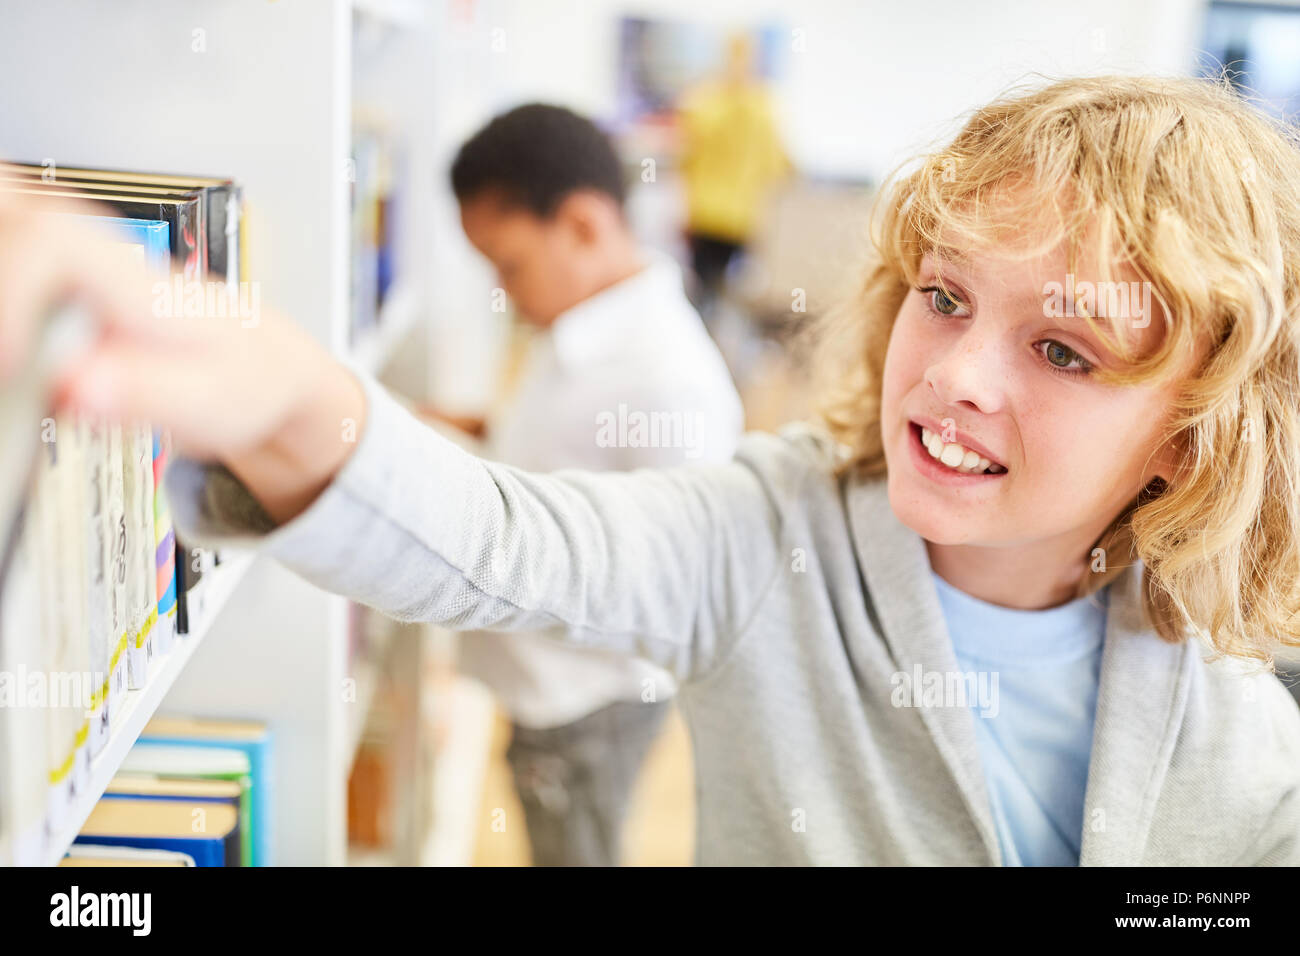 Two students in the school's library borrow books to study Stock Photo